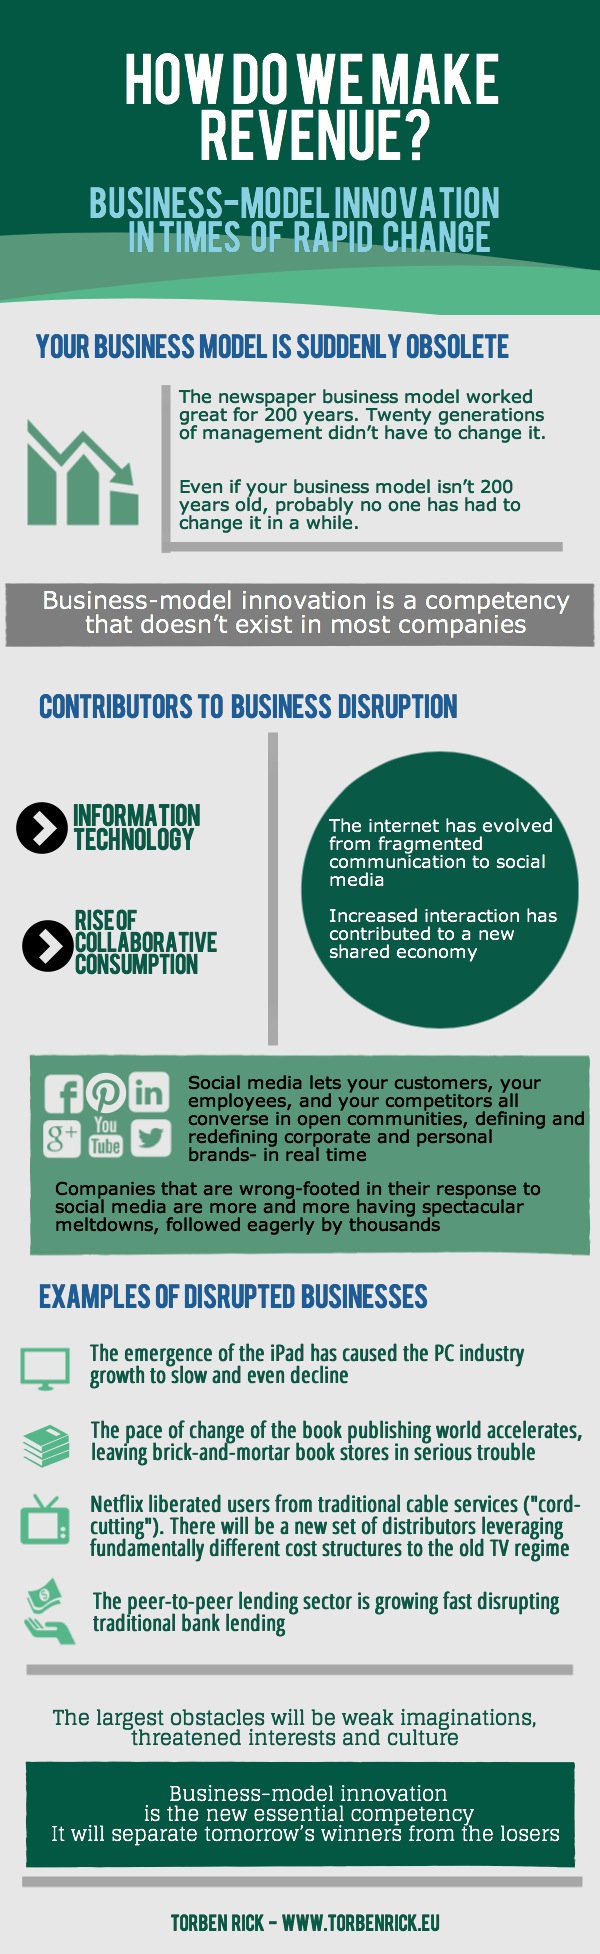 Infographic: Don’t underestimate the potential of digital disruption - Torben Rick